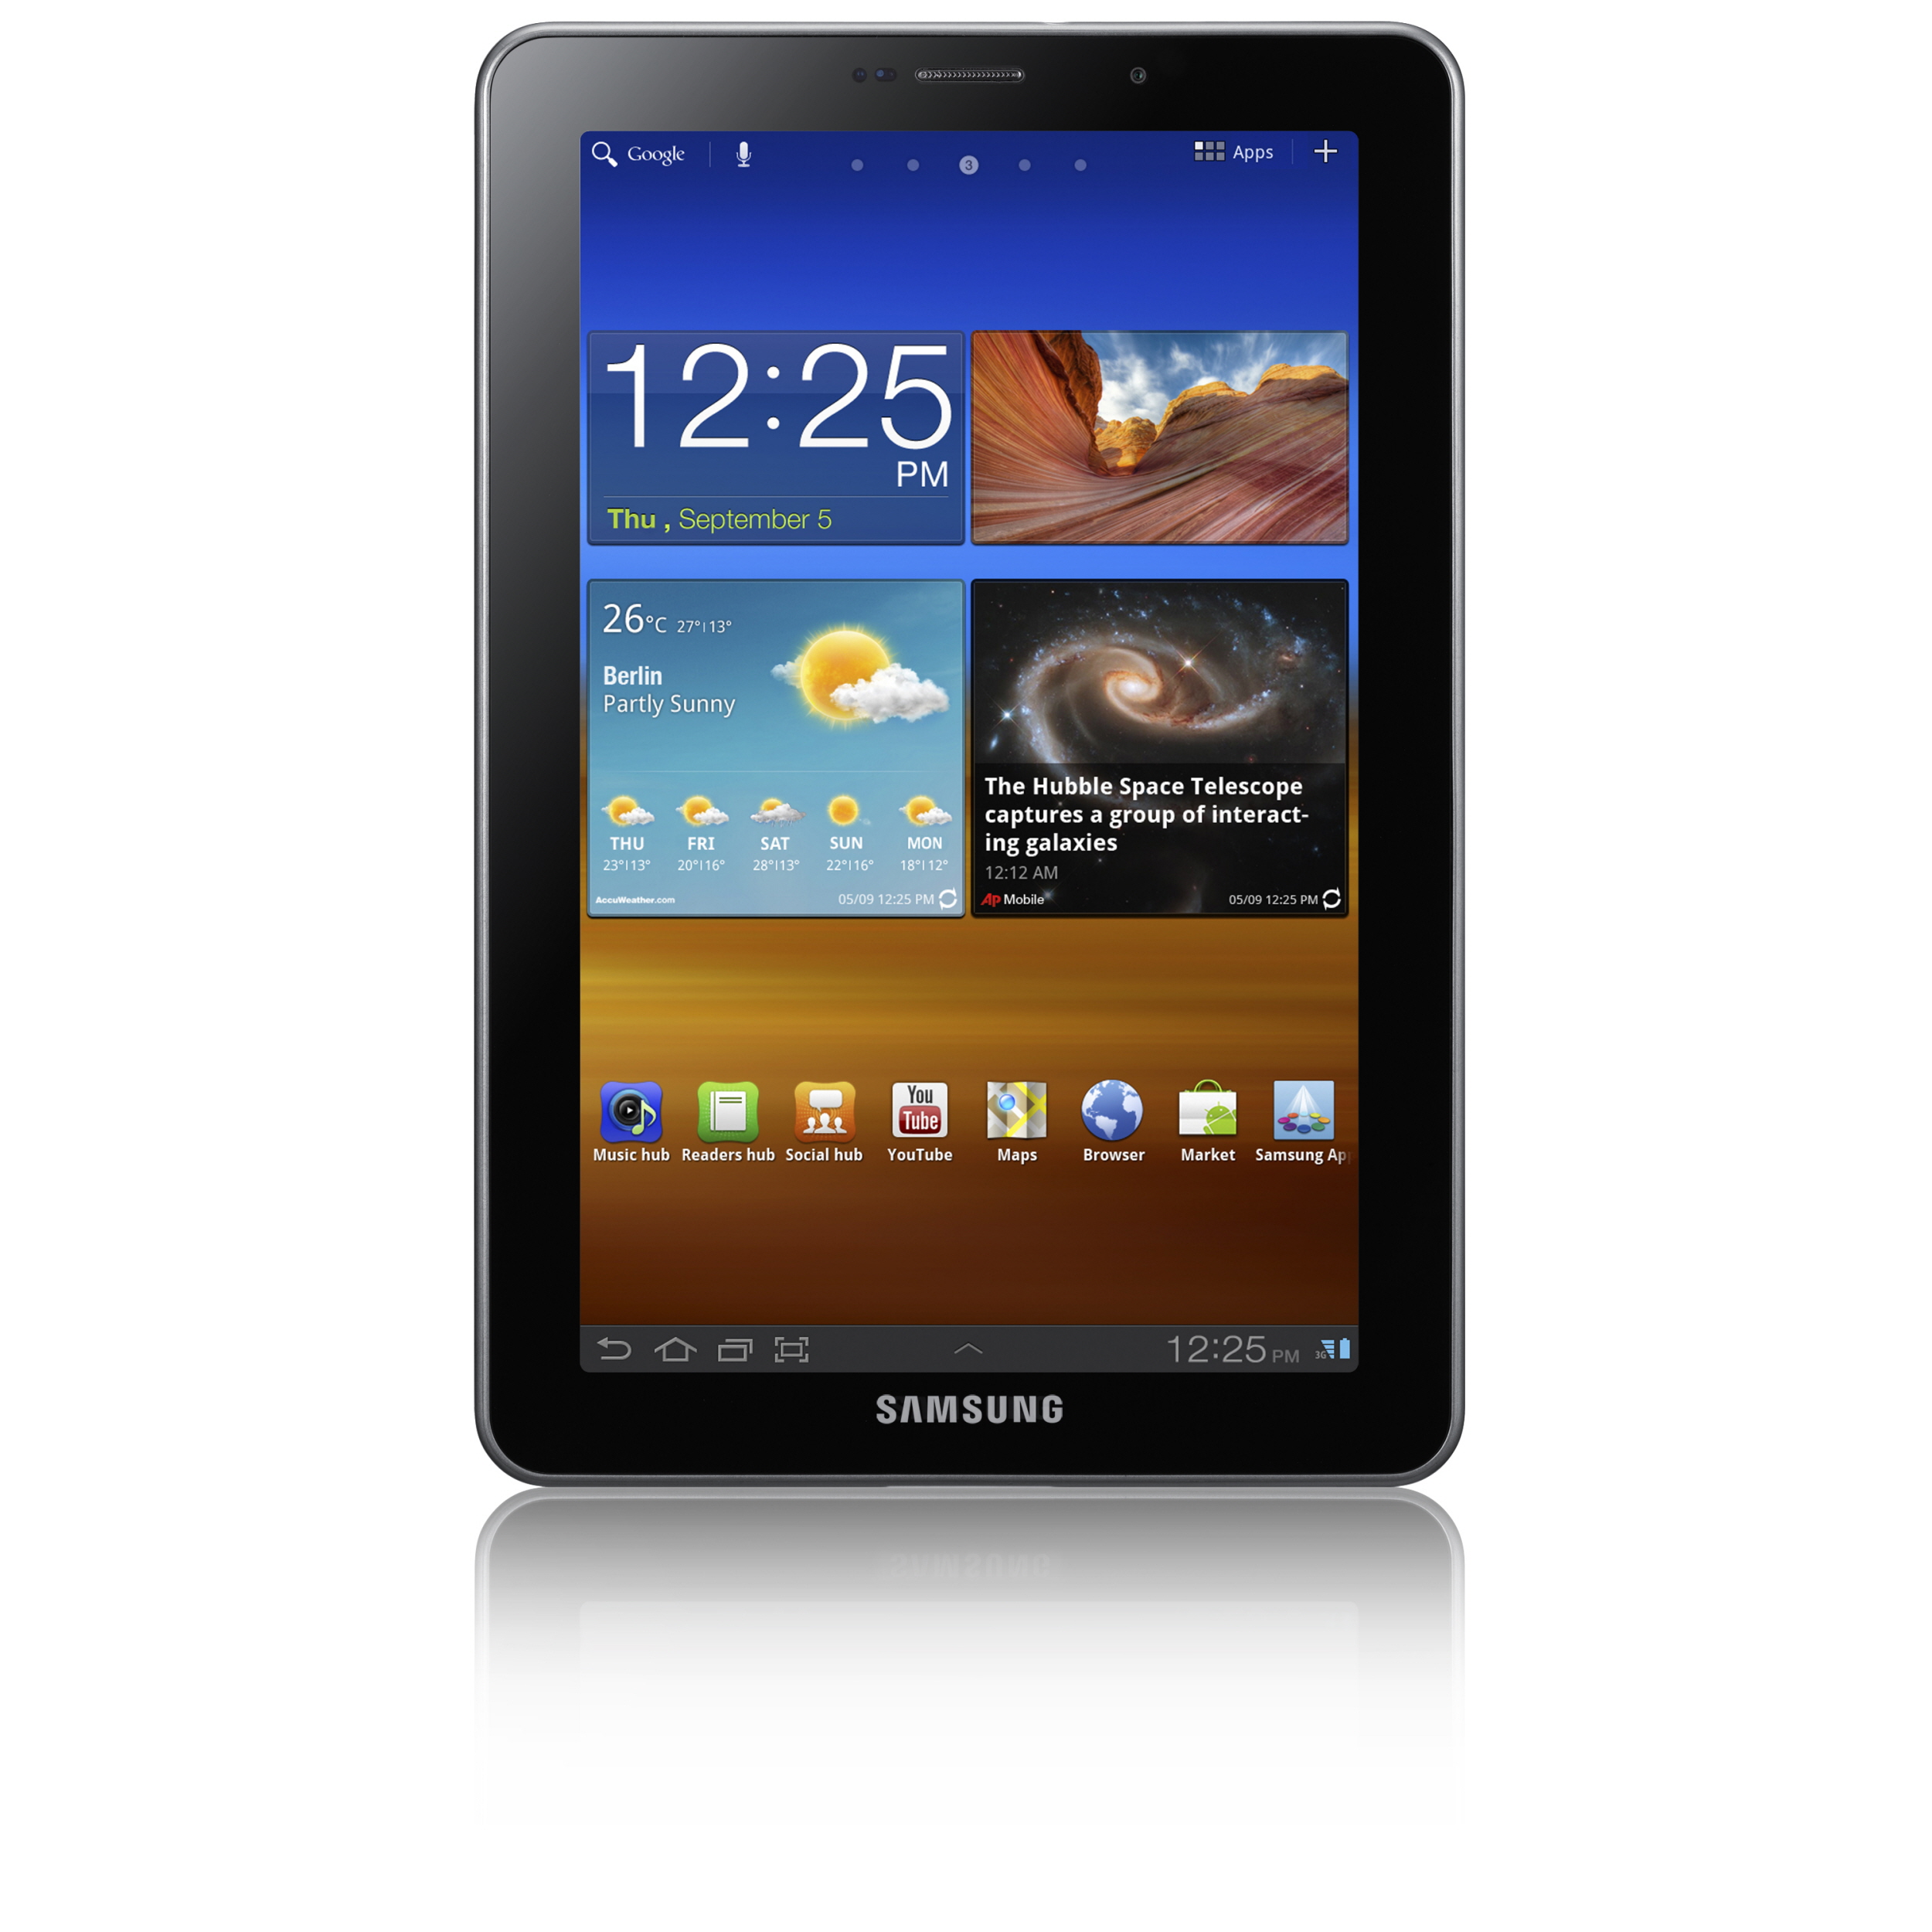 Samsung unveils the Galaxy Tab 7.7 – a very cool tablet/phone hybrid